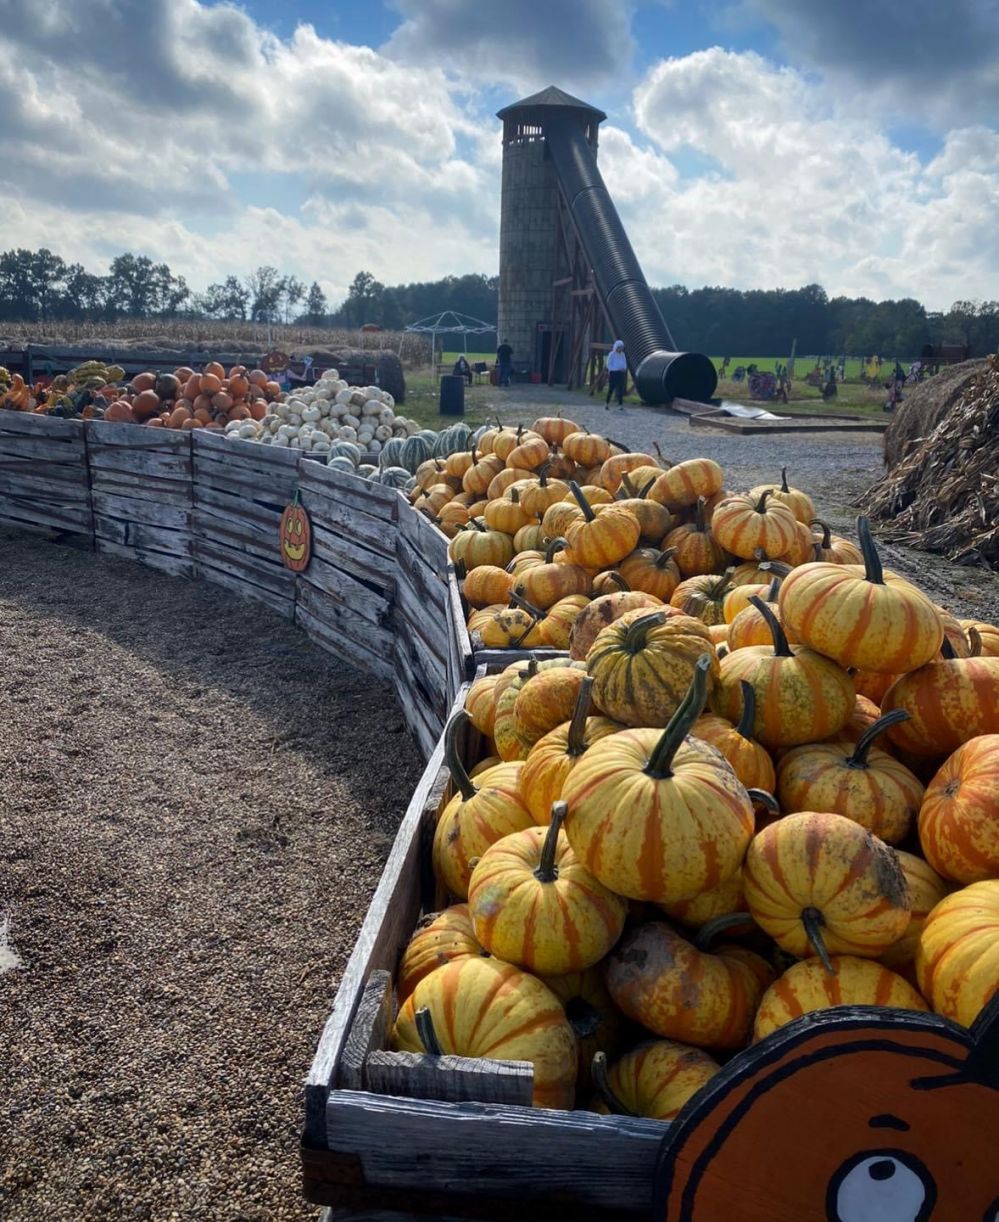 Stay-dine-discover-enjoy-mt-vernon-illinois-marlows-pumpkin-patch